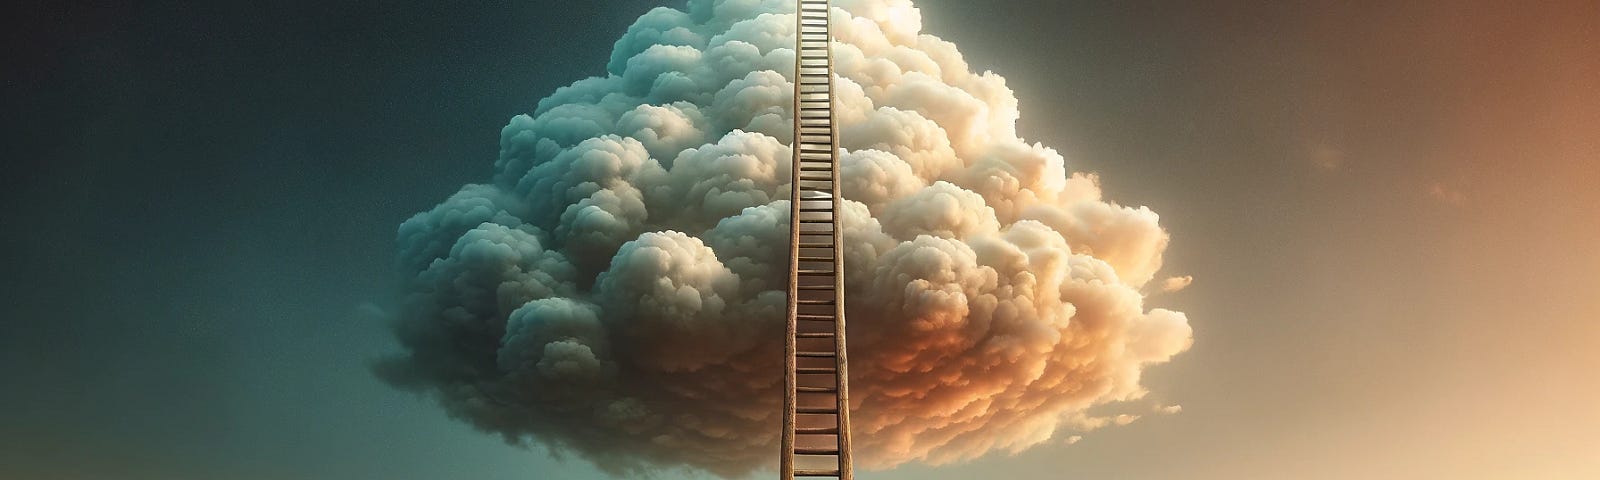 ChatGPT & DALL-E generated panoramic image of a ladder extending upwards into the sky, leading to nowhere amidst the clouds.